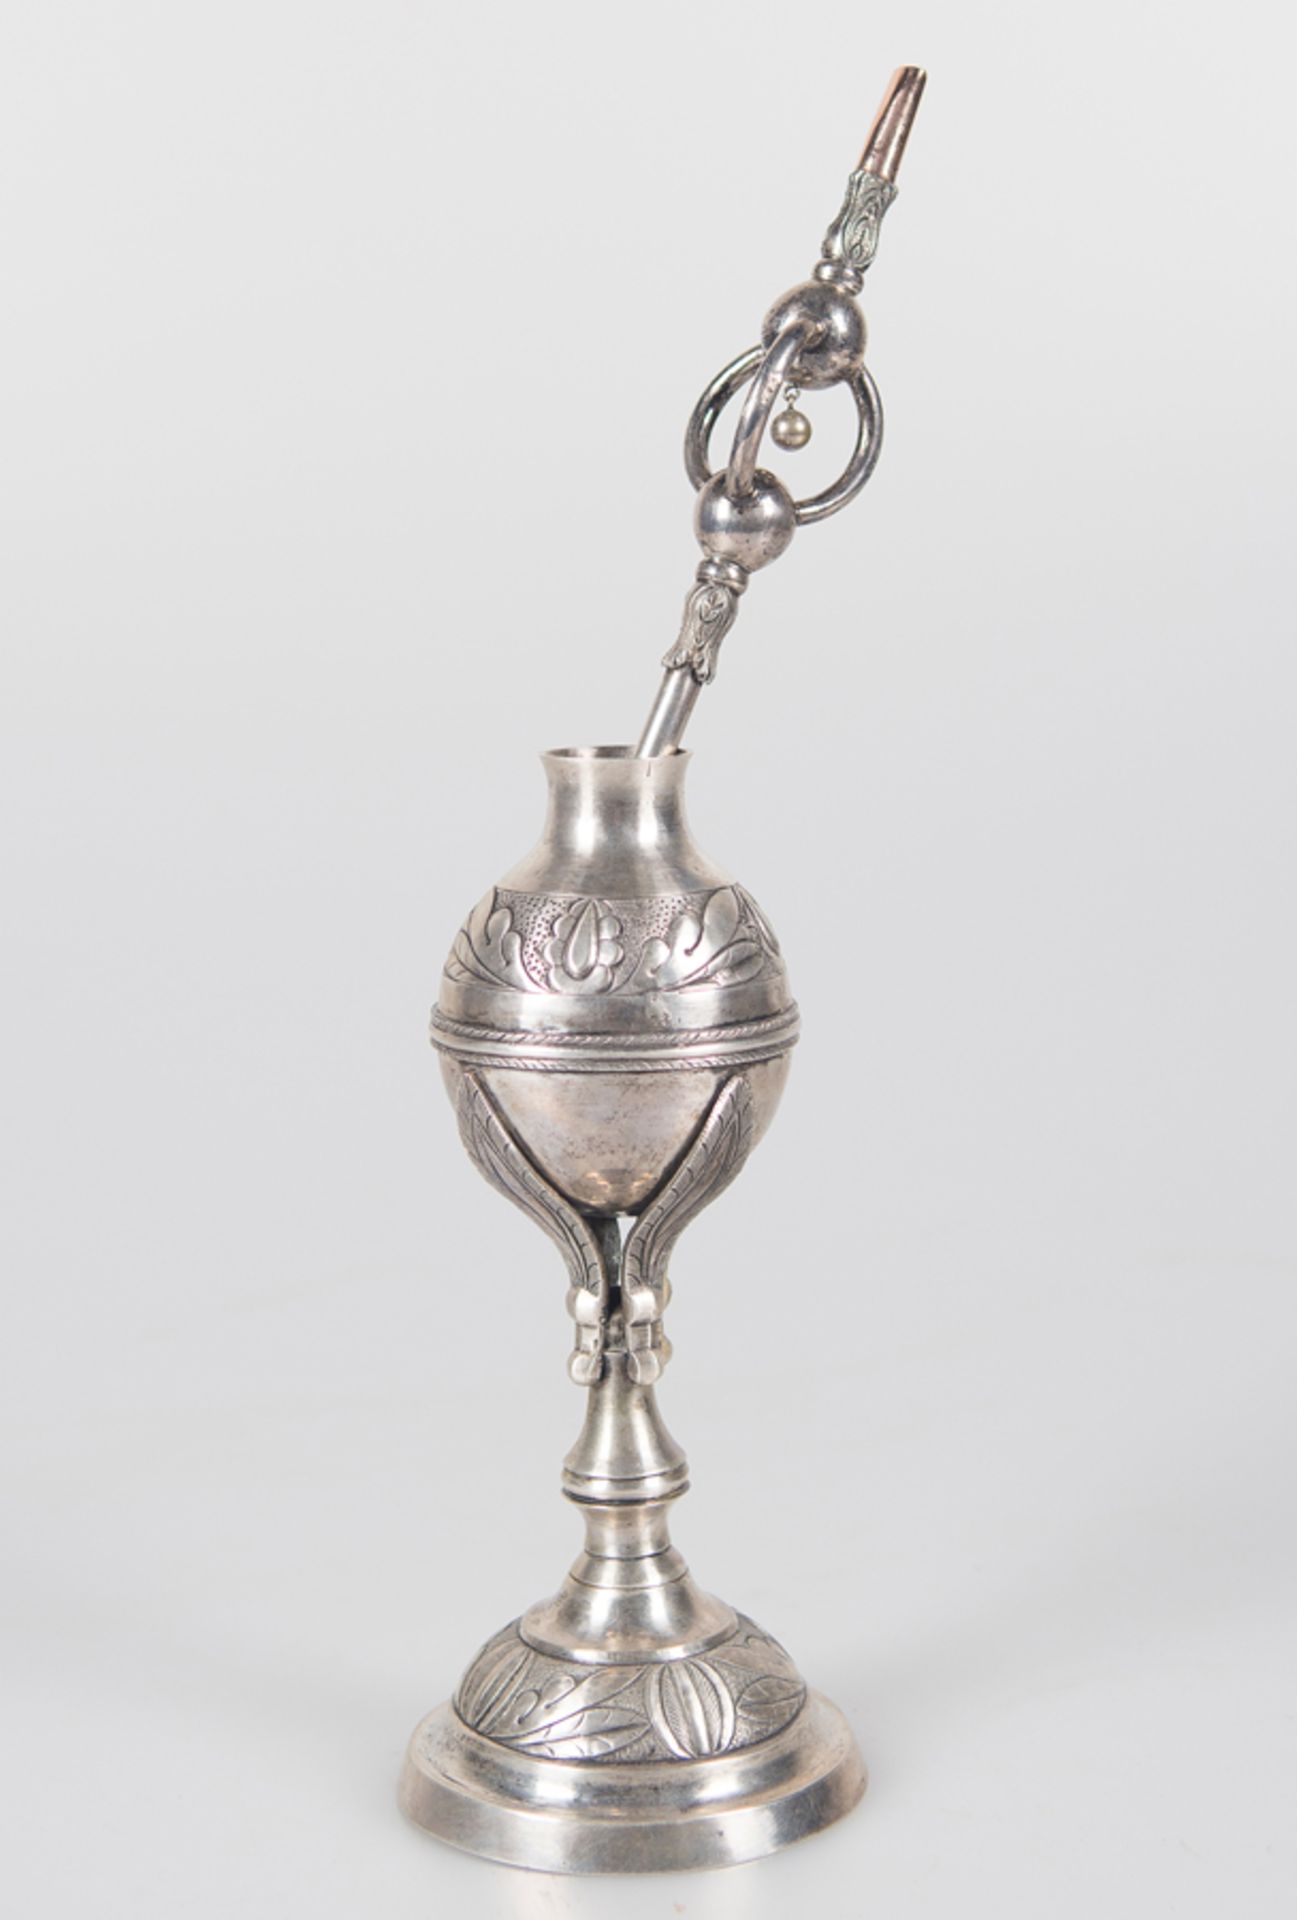 Mate in silver and gilded silver with its original bulb. Viceregal work. Possibly Chile or Cuyo regi